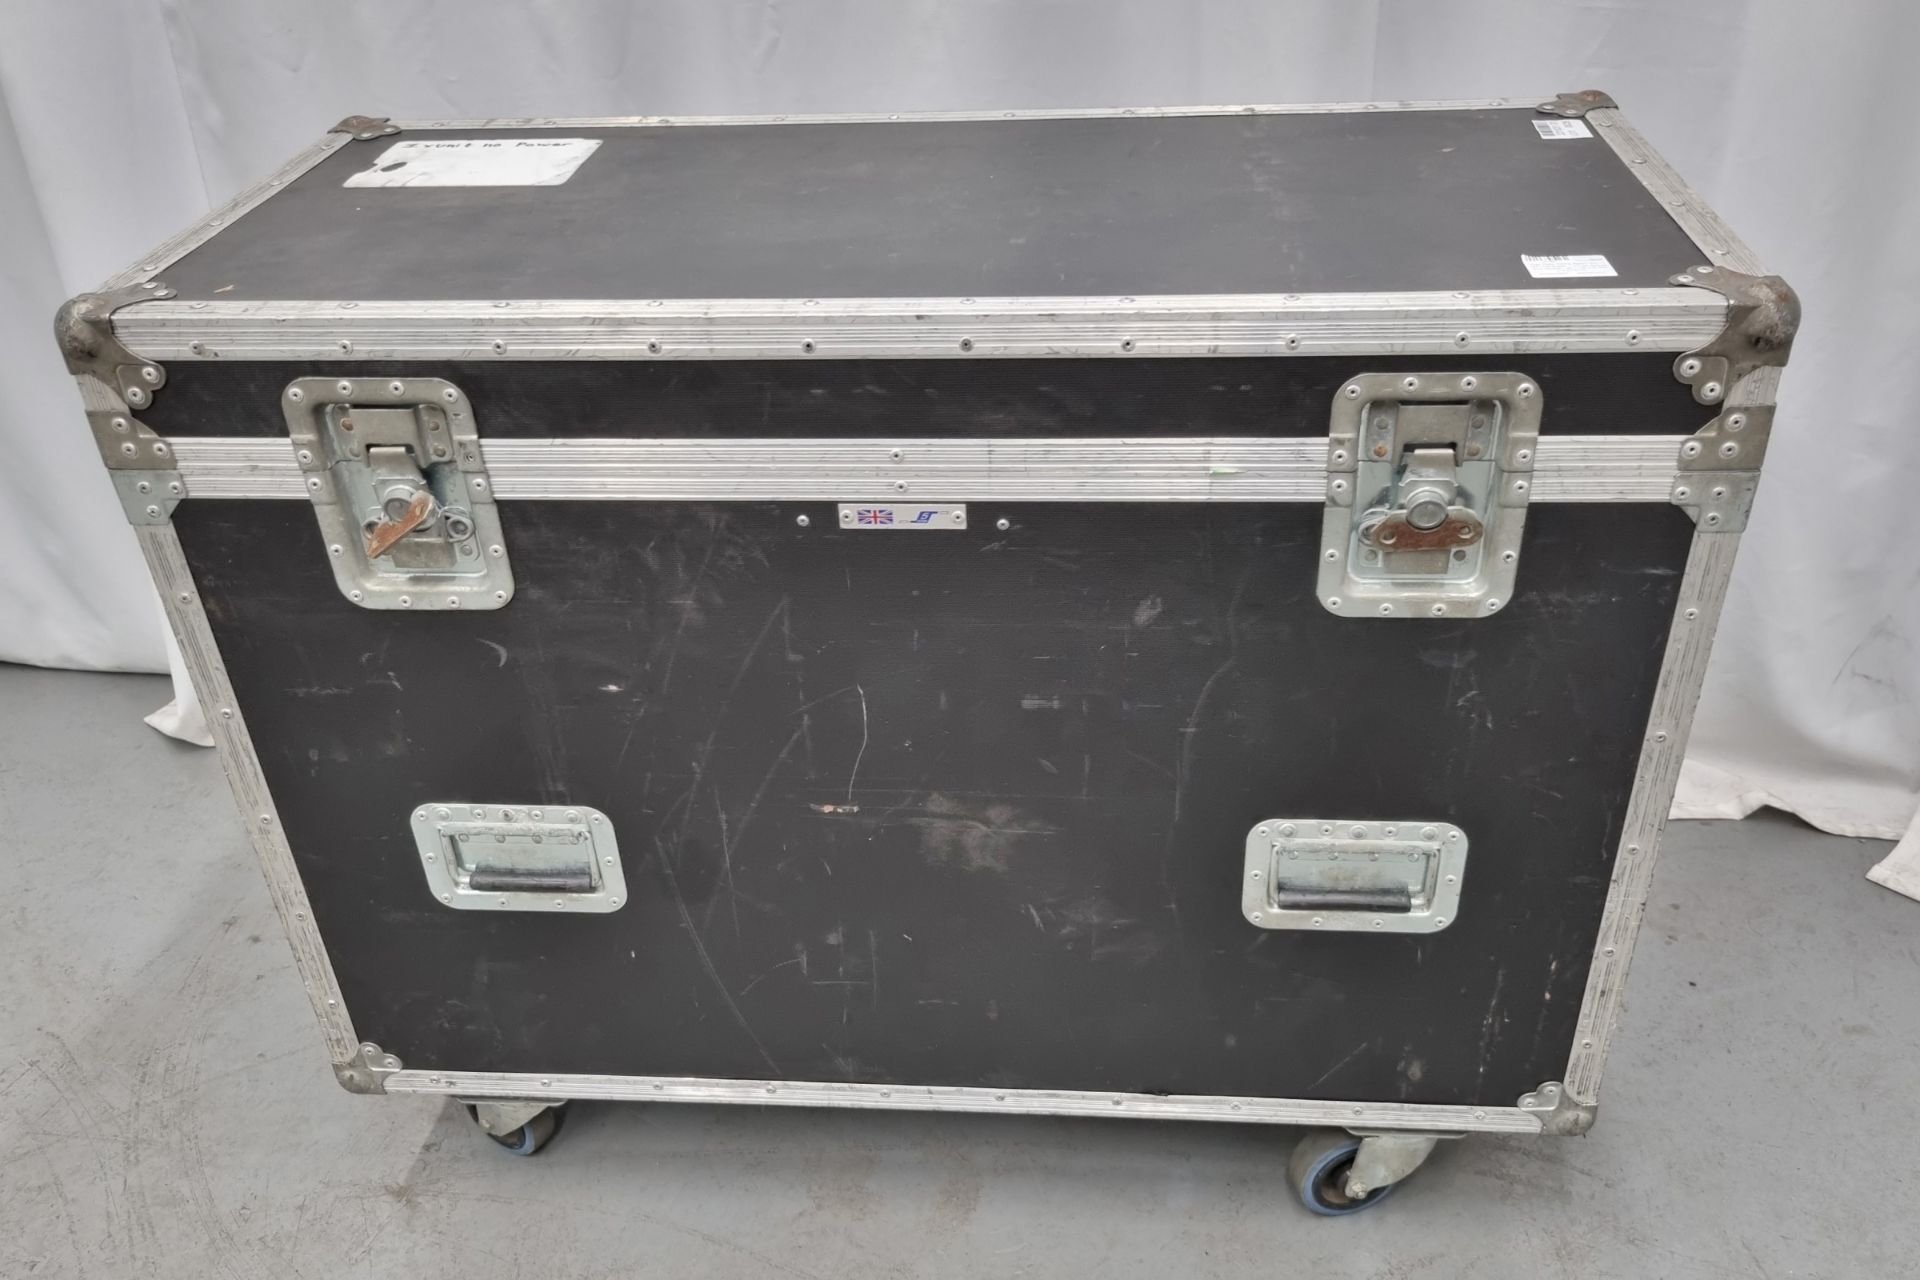 Clay Paky Alpha Beam 300 in twin flight case - unit as spares and repairs - W 1100 x D 490 x H 870mm - Image 9 of 9